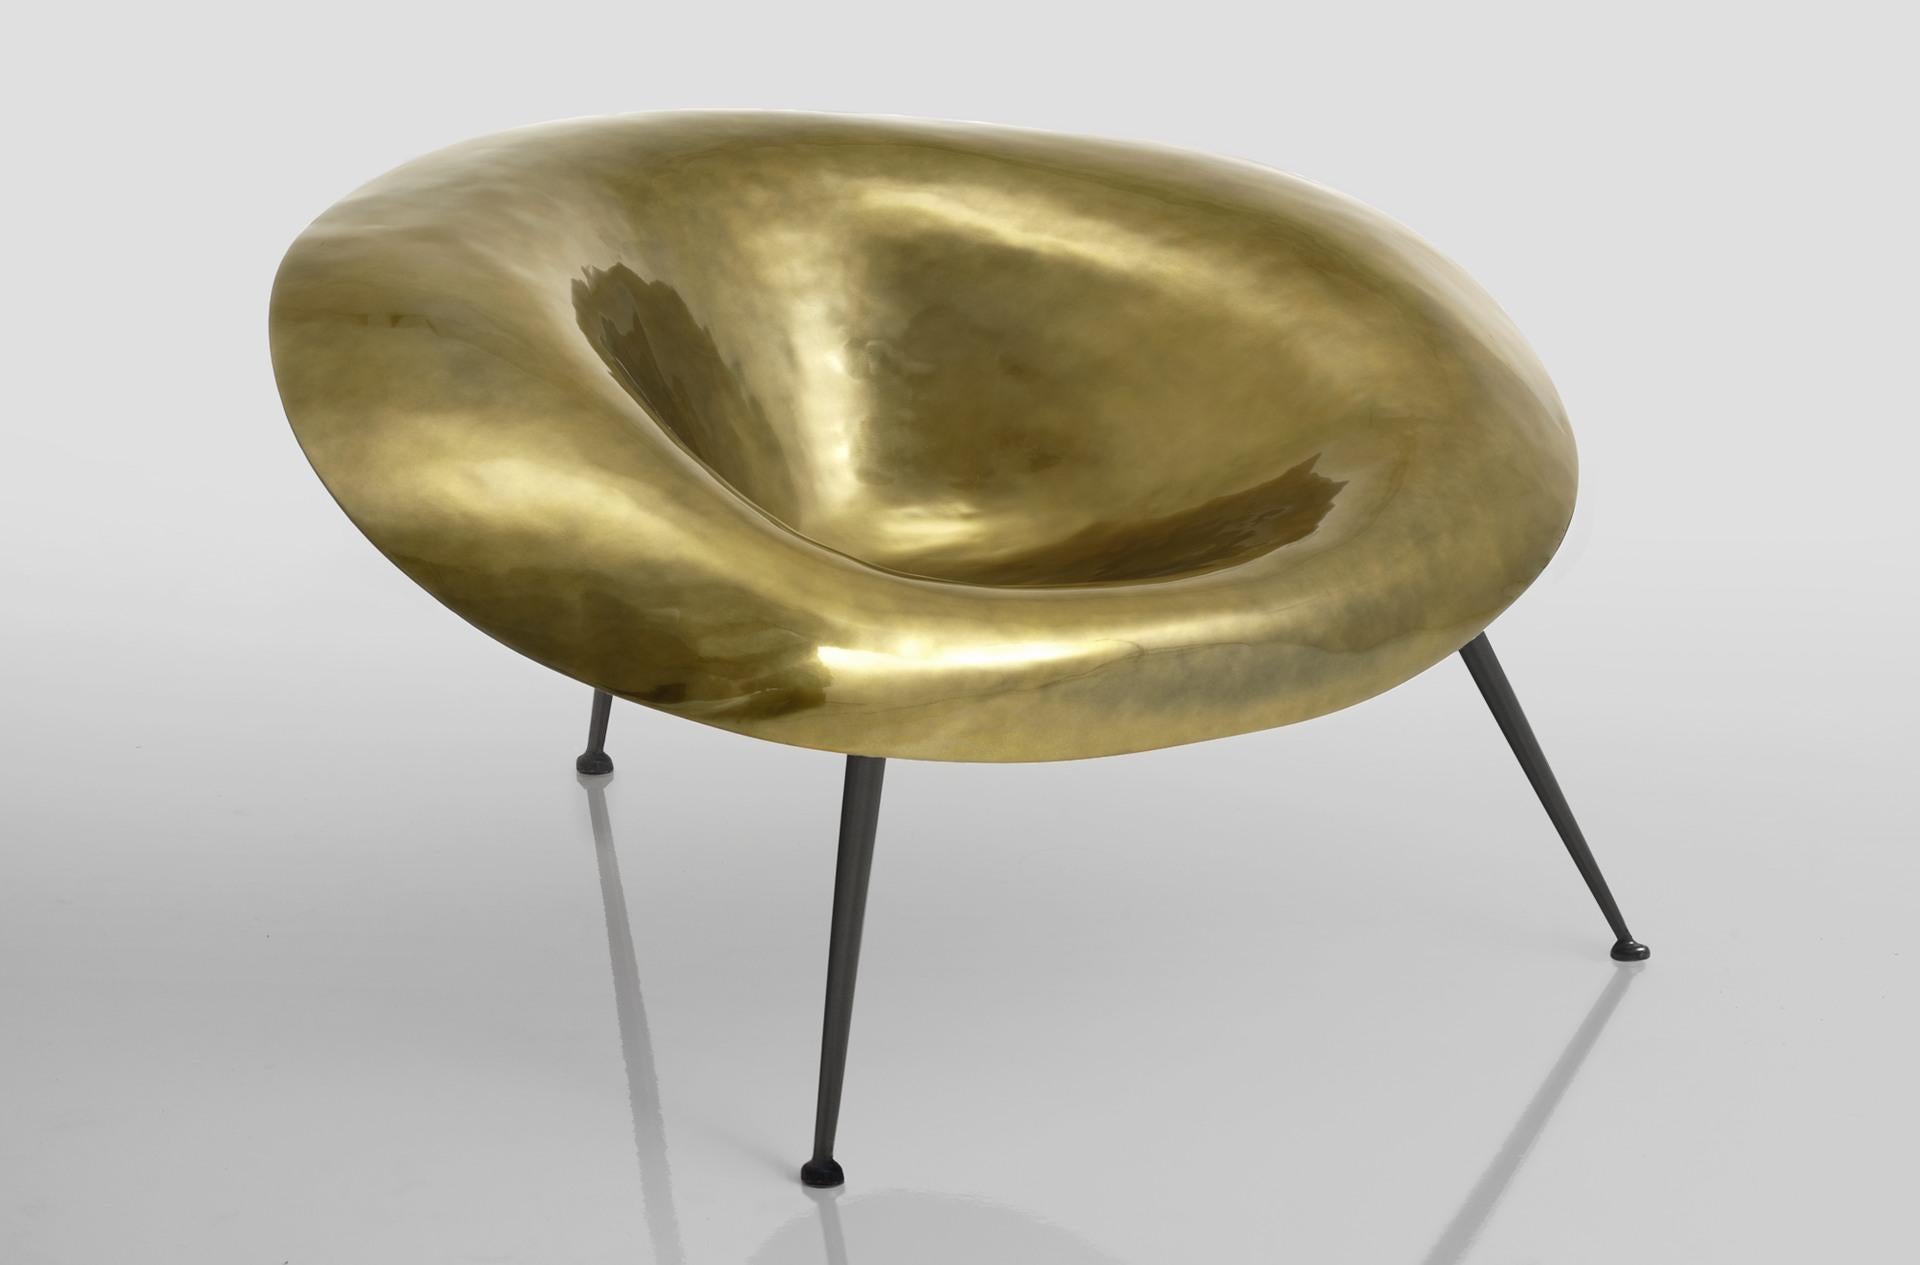 Gold Nido by Imperfettolab
2008
Dimensions: W 130 x D 97 x H 66 cm 
Materials: varnished fibreglass, metal base
 Gold finish

Imperfetto lab
Who we are ? We are a family.
Verter Turroni, Emanuela Ravelli and our children Elia, Margherita and